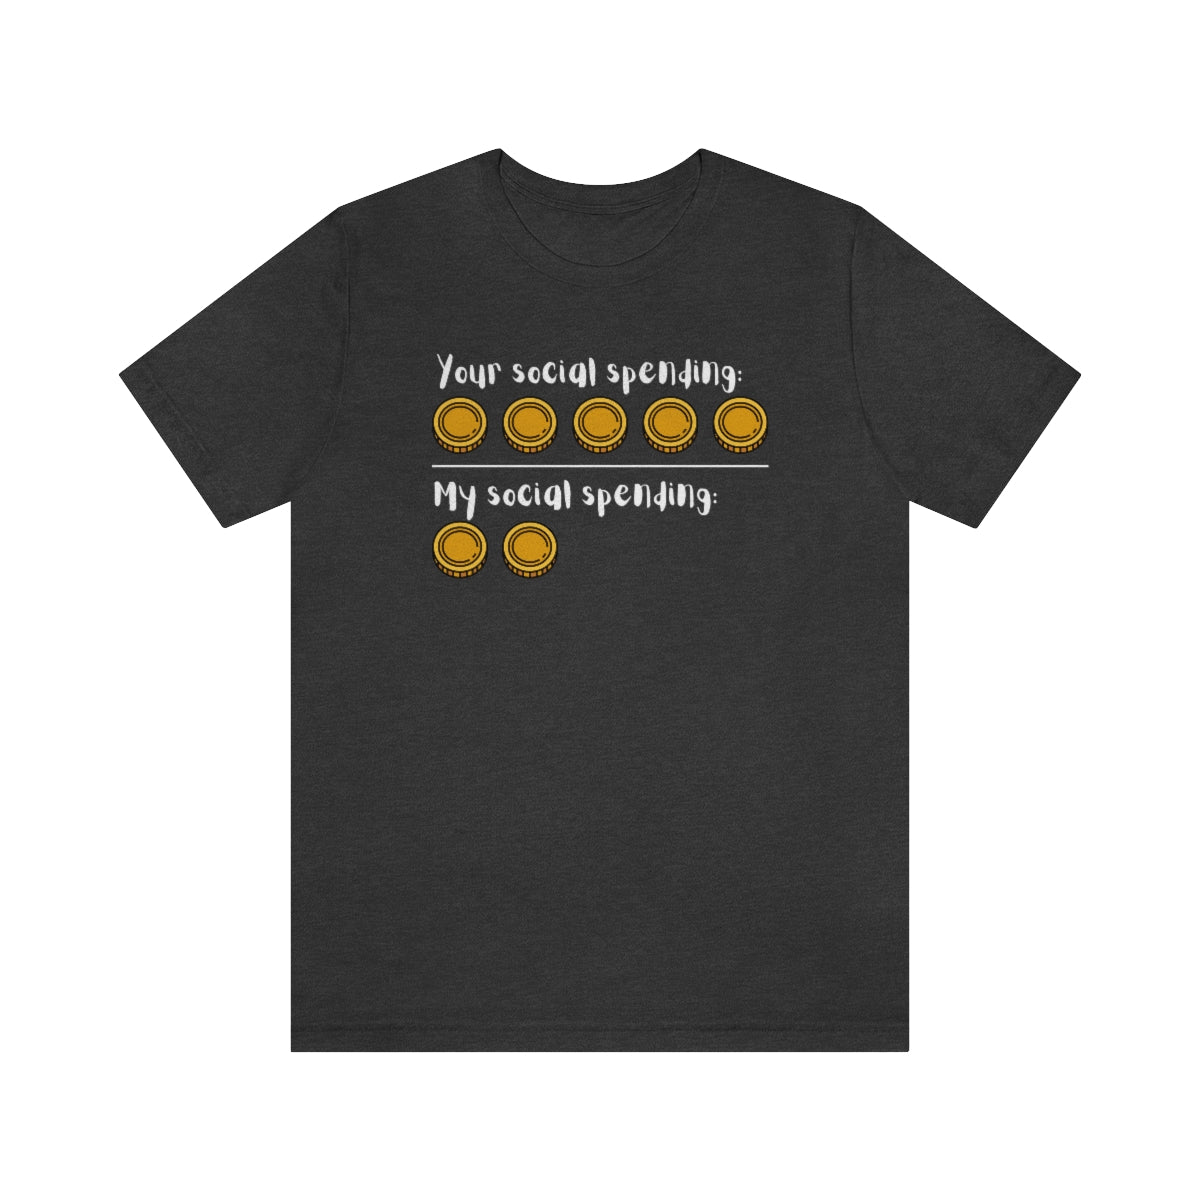 A dark grey heather shirt with the text "Your social spending" with 5 coins  and "my social spending" with 2 coins